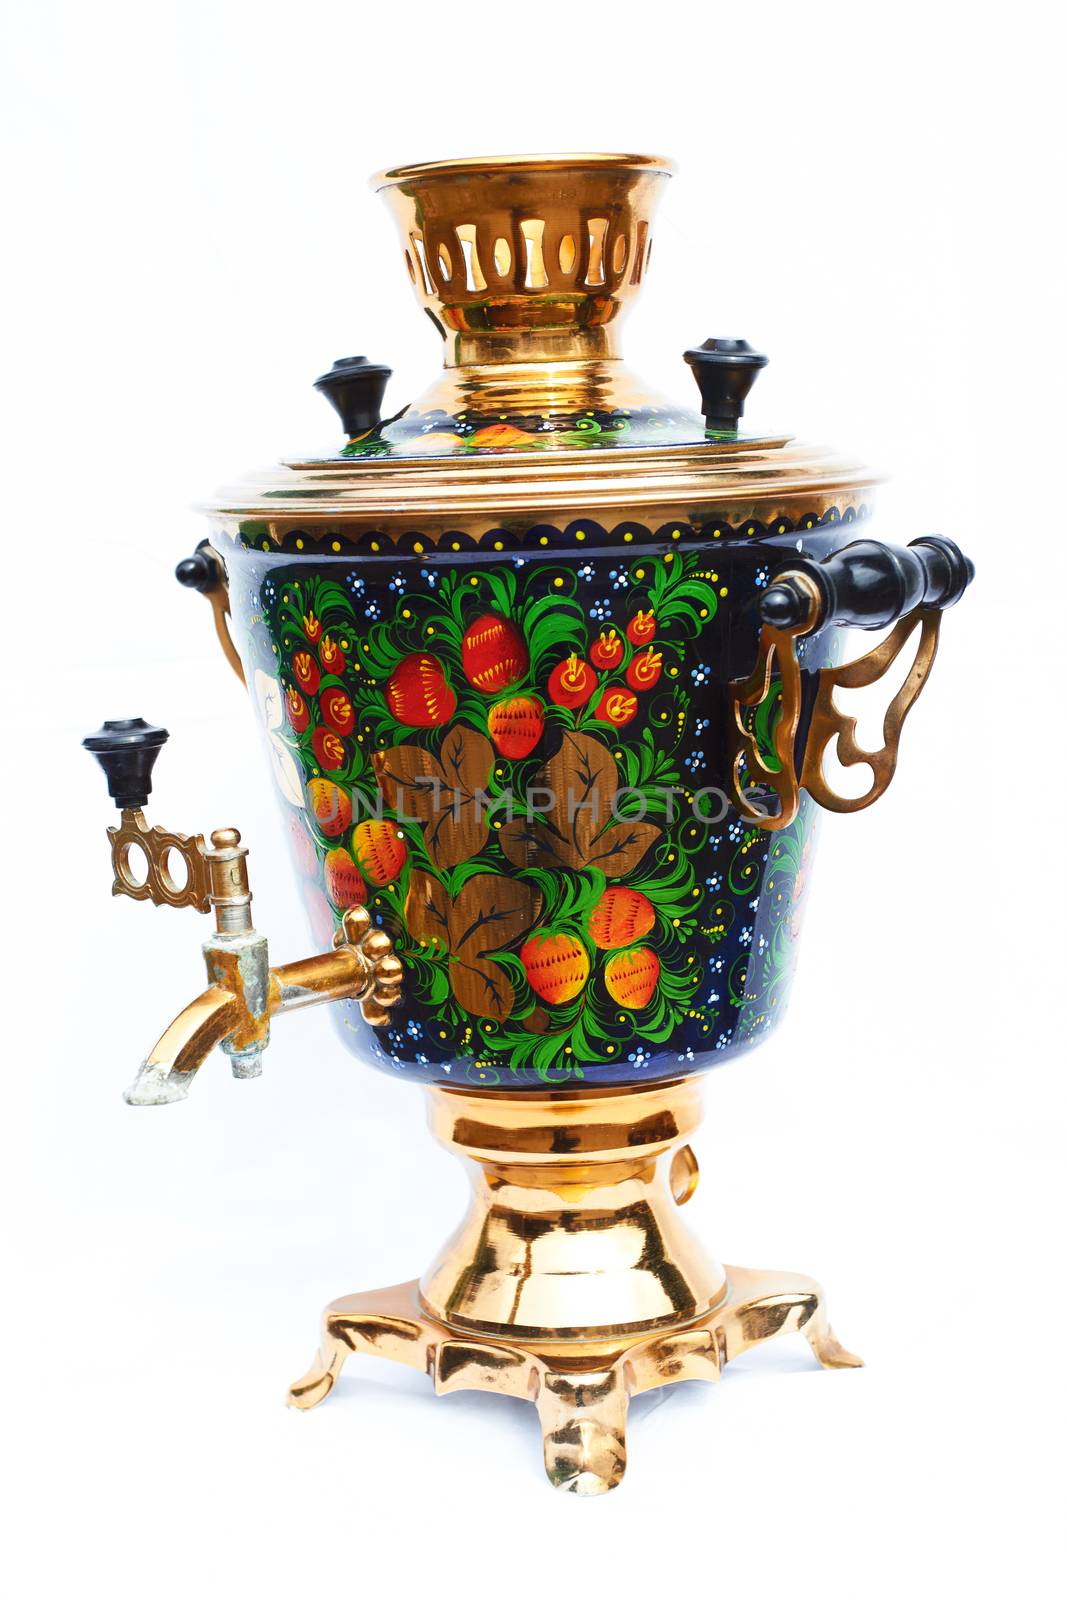 Russian traditional samovar on white